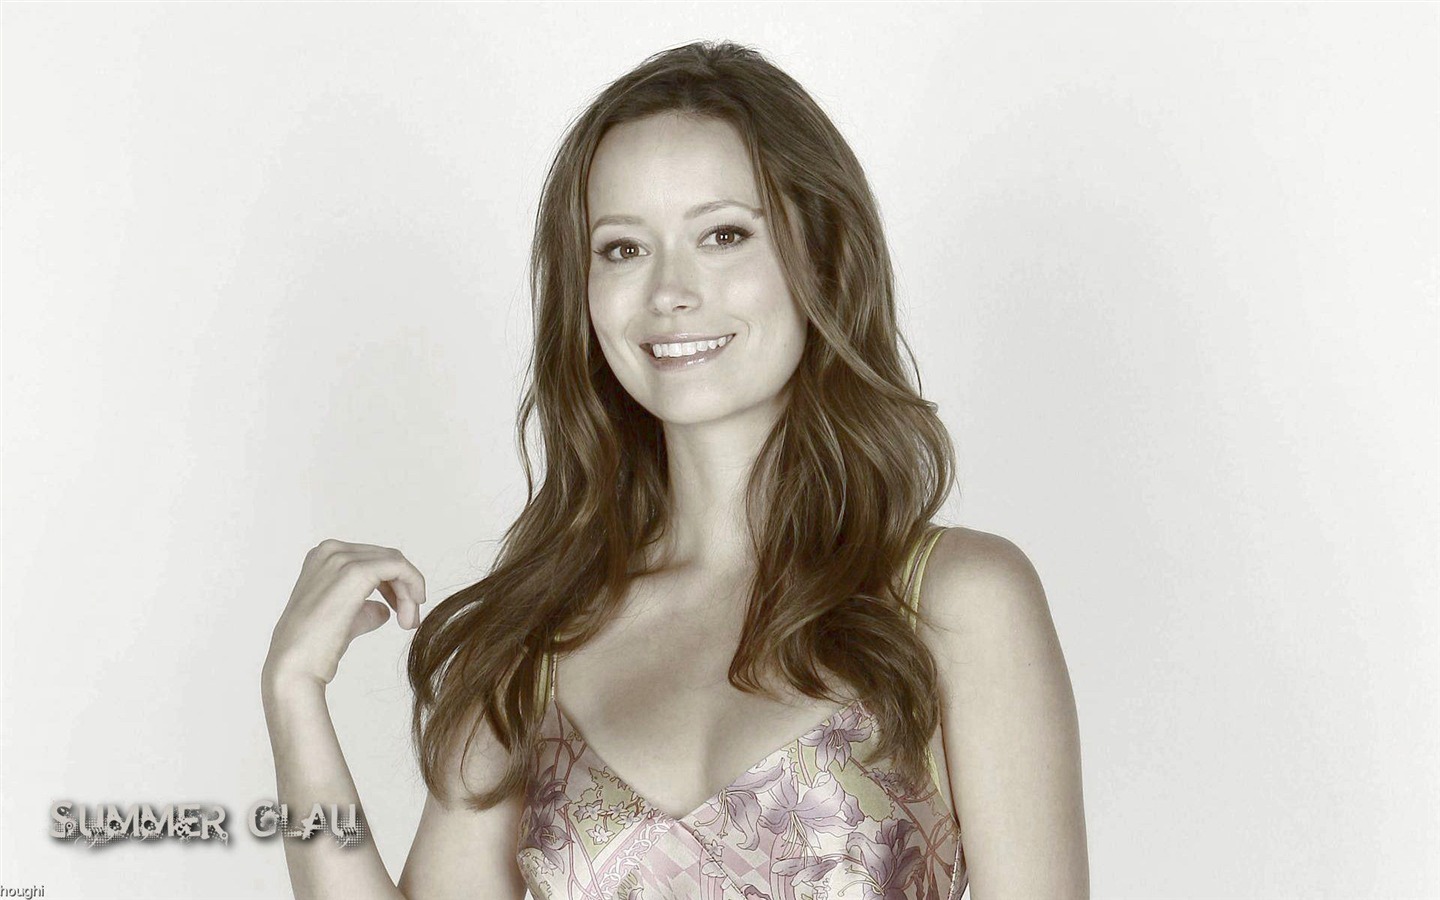 Summer Glau #011 - 1440x900 Wallpapers Pictures Photos Images